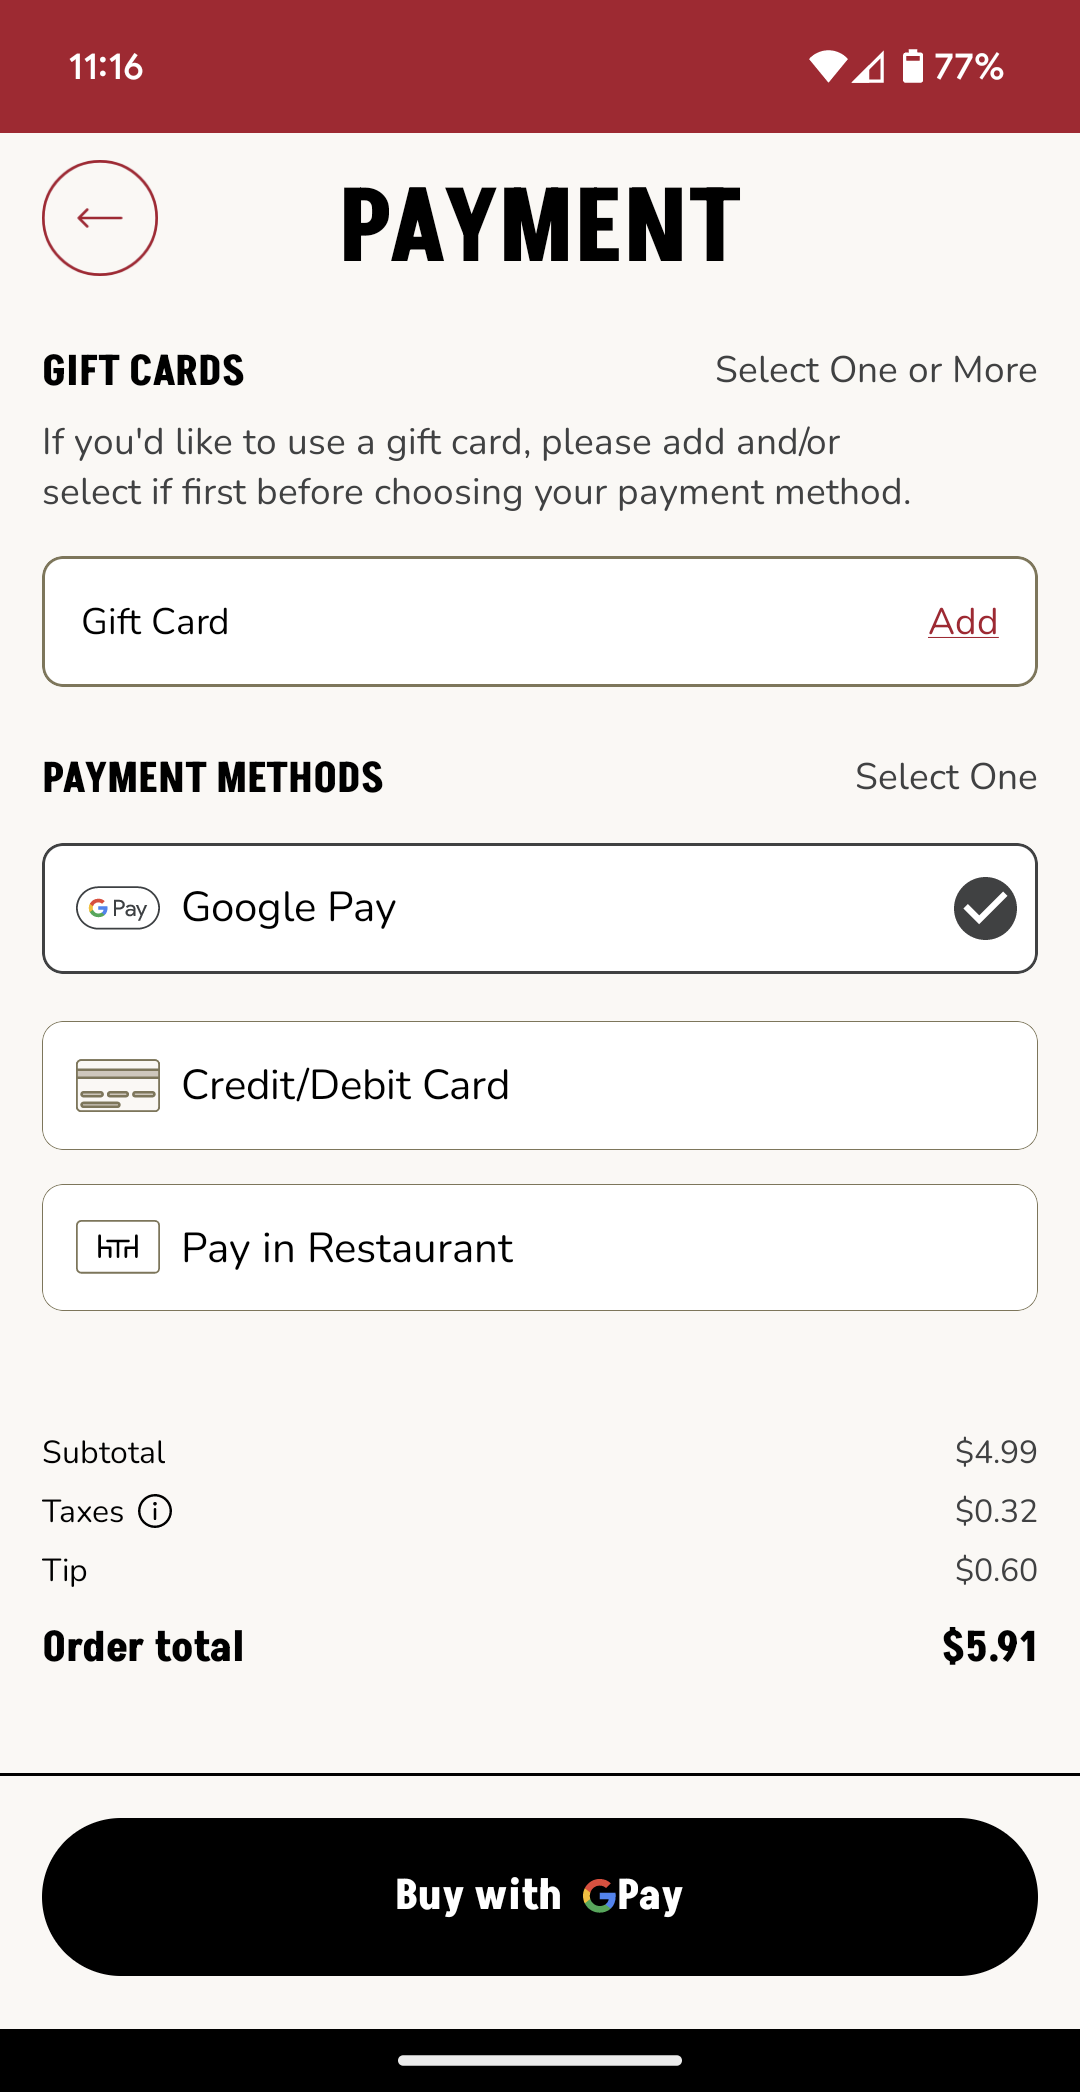 Applebee's accepts Google Pay in its Android app.